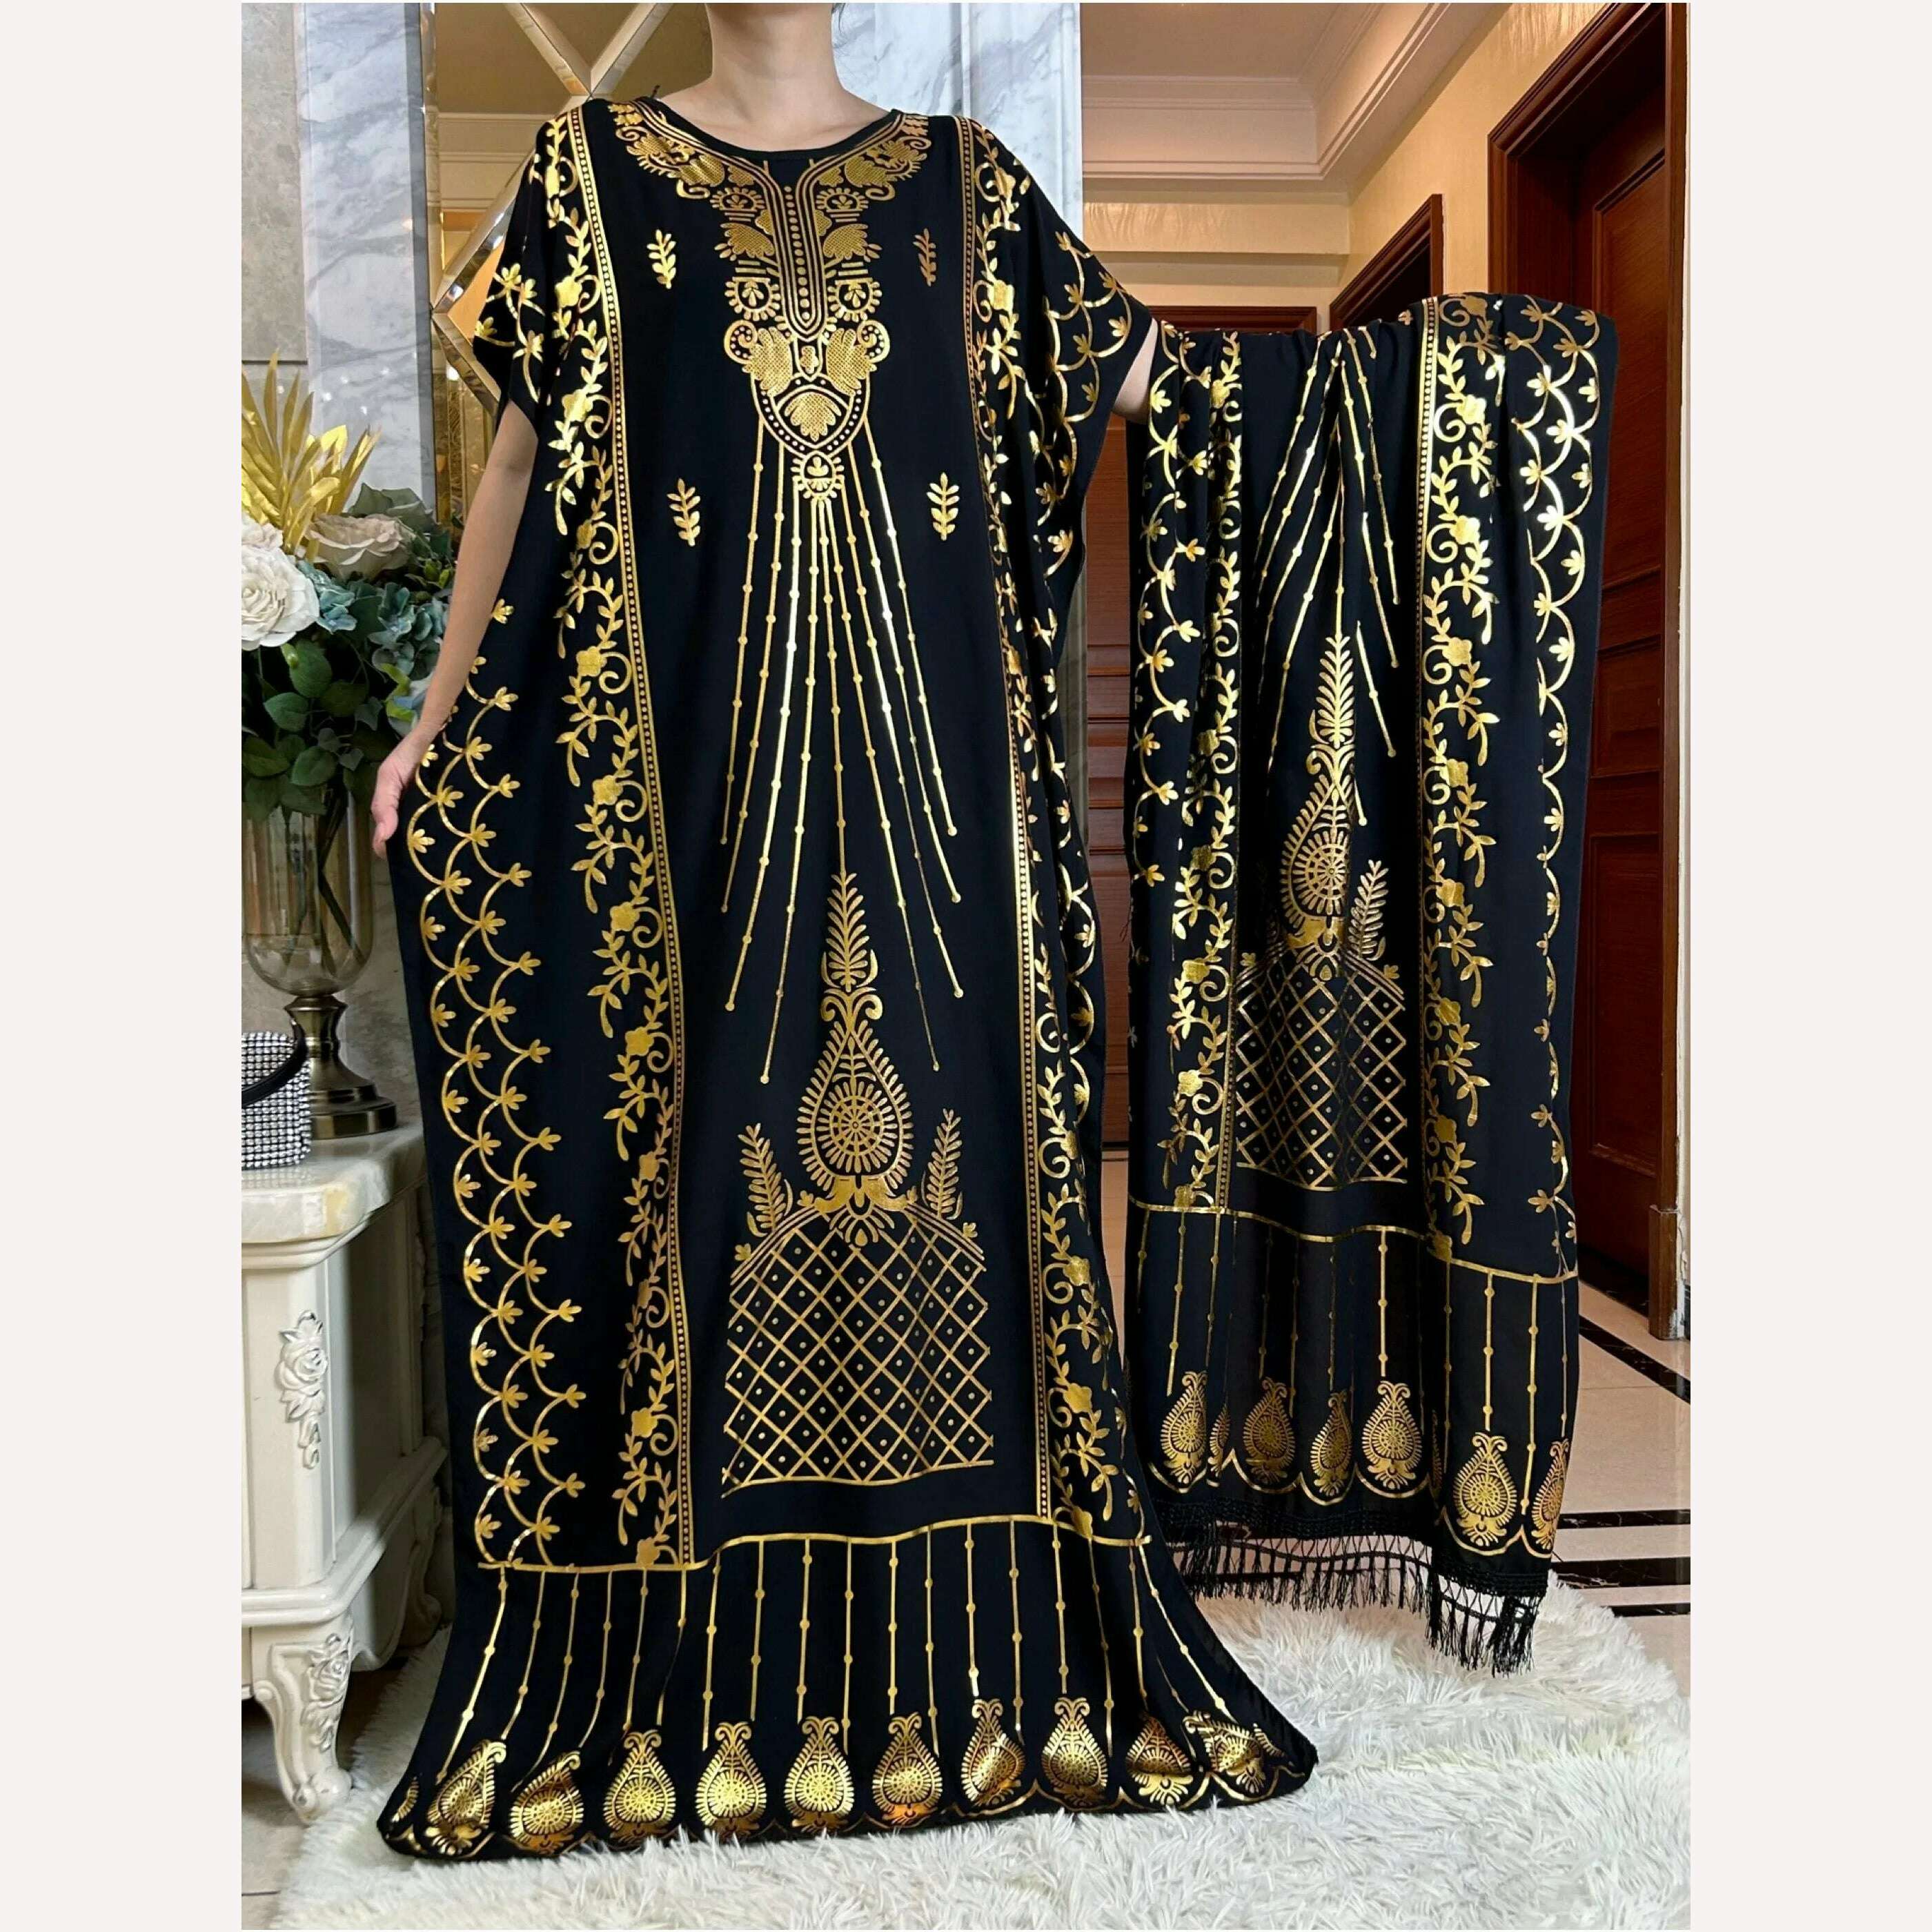 KIMLUD, Dubai New Abaya For Women  Summer Short Sleeve Cotton Dress Gold Stamping Loose Lady Maxi Islam African Dress With Big Scarf, HB438-9 / One Size, KIMLUD Women's Clothes